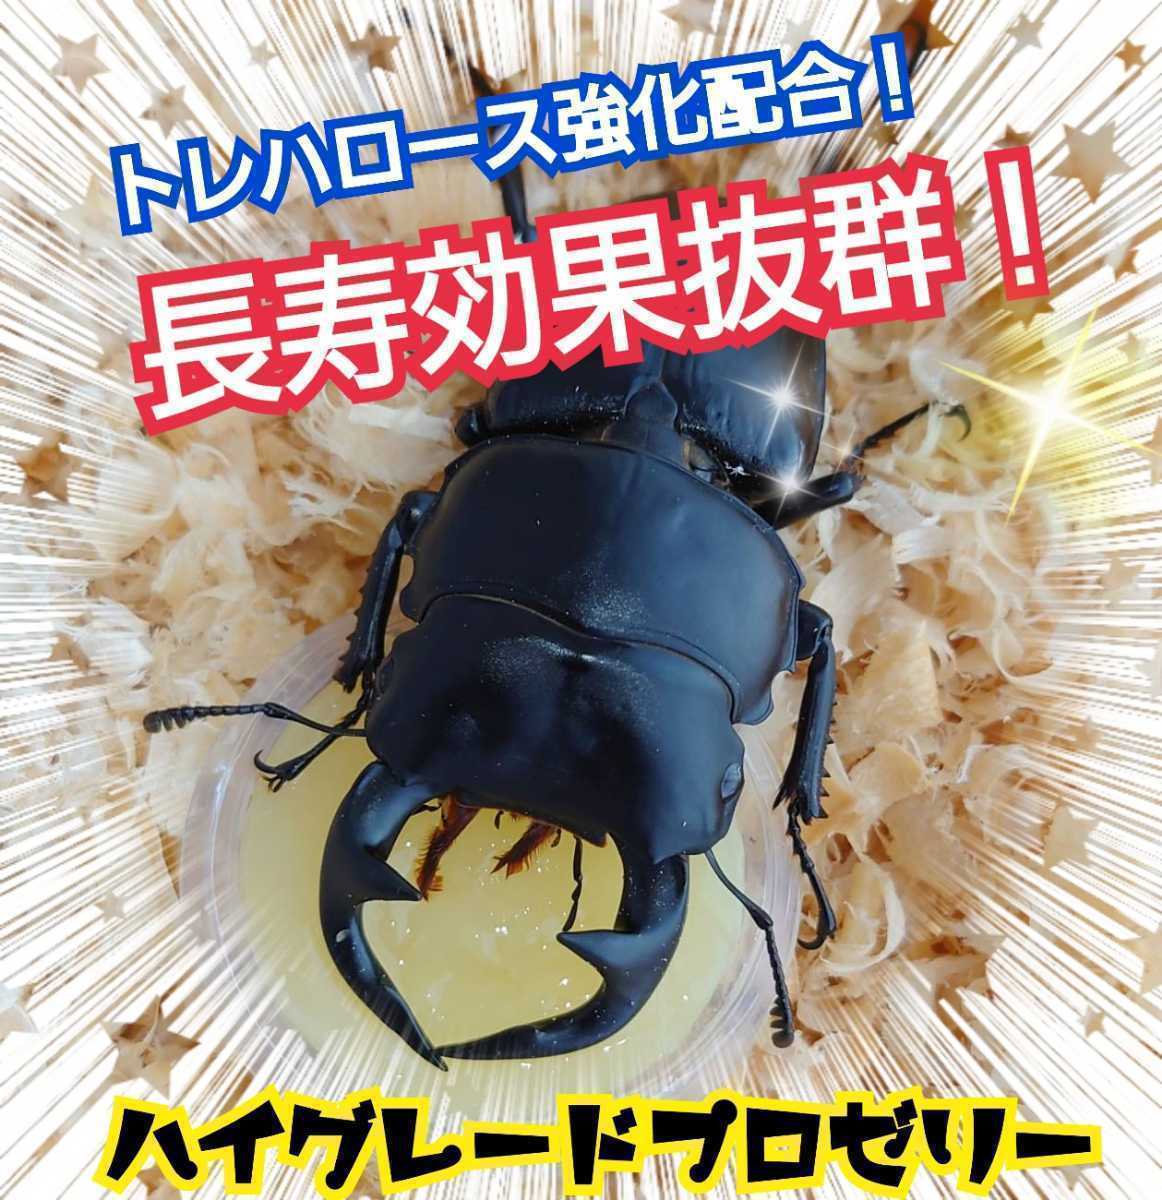  high grade Pro jelly [50 piece insertion ]tore Hello s strengthen! stag beetle, rhinoceros beetle. production egg number up * length . effect . eminent! meal .... wide cup 